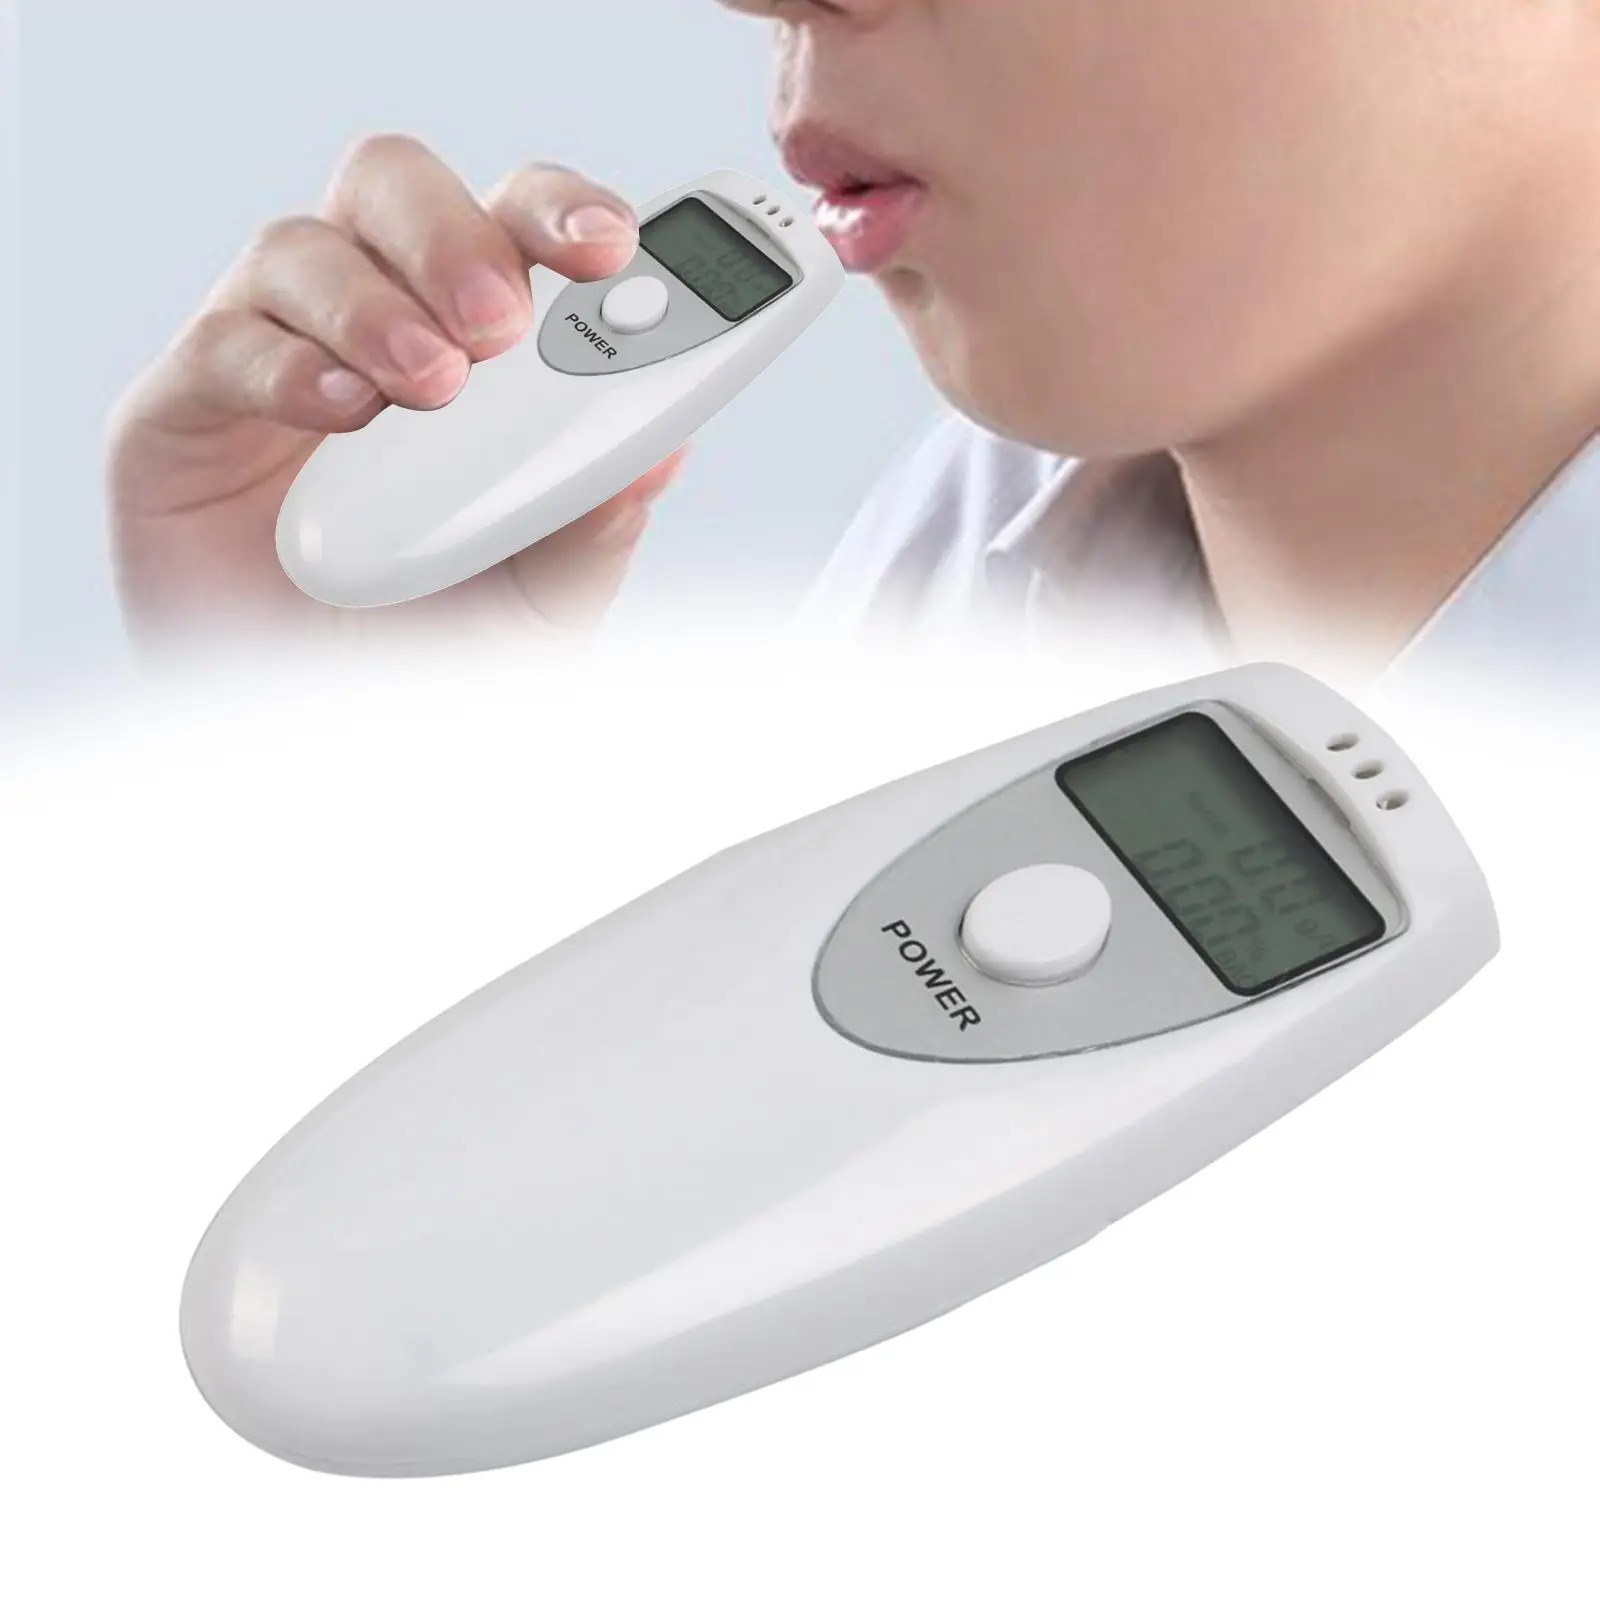 Portable Digital Alcohol Tester Small Size Easy to Carry Good Accuracy